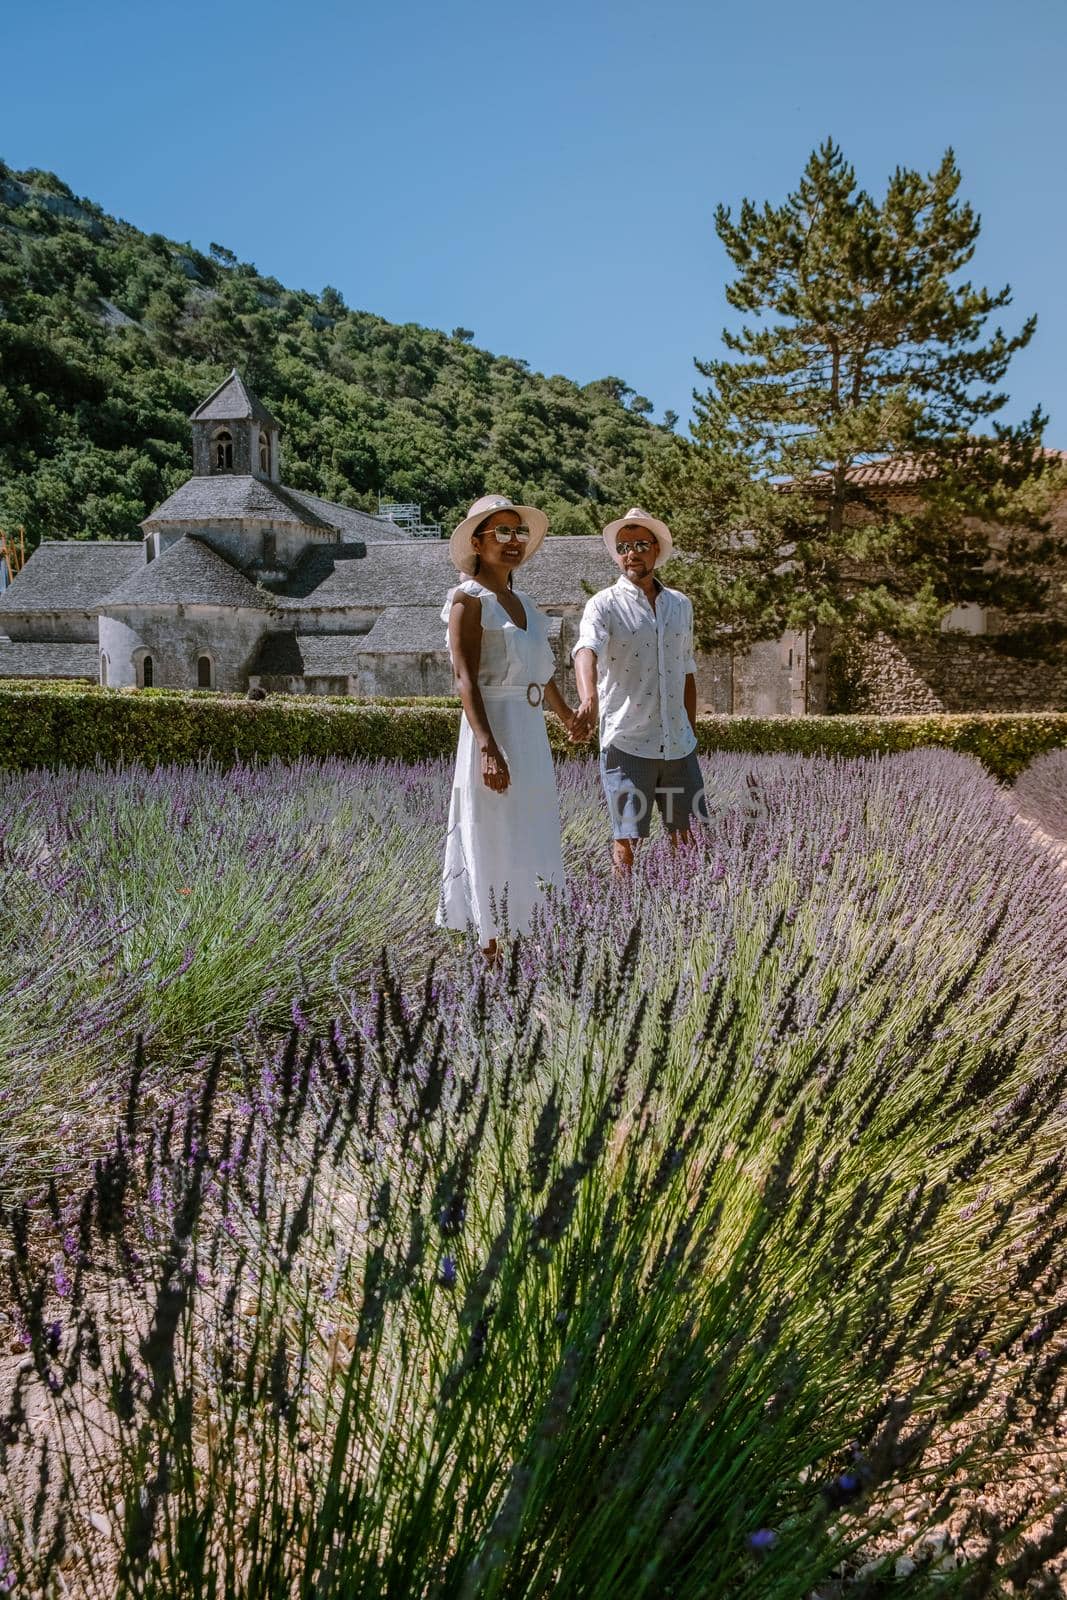 couple visit the old town of Gordes Provence,Blooming purple lavender fields at Senanque monastery, Provence, southern France. Europe